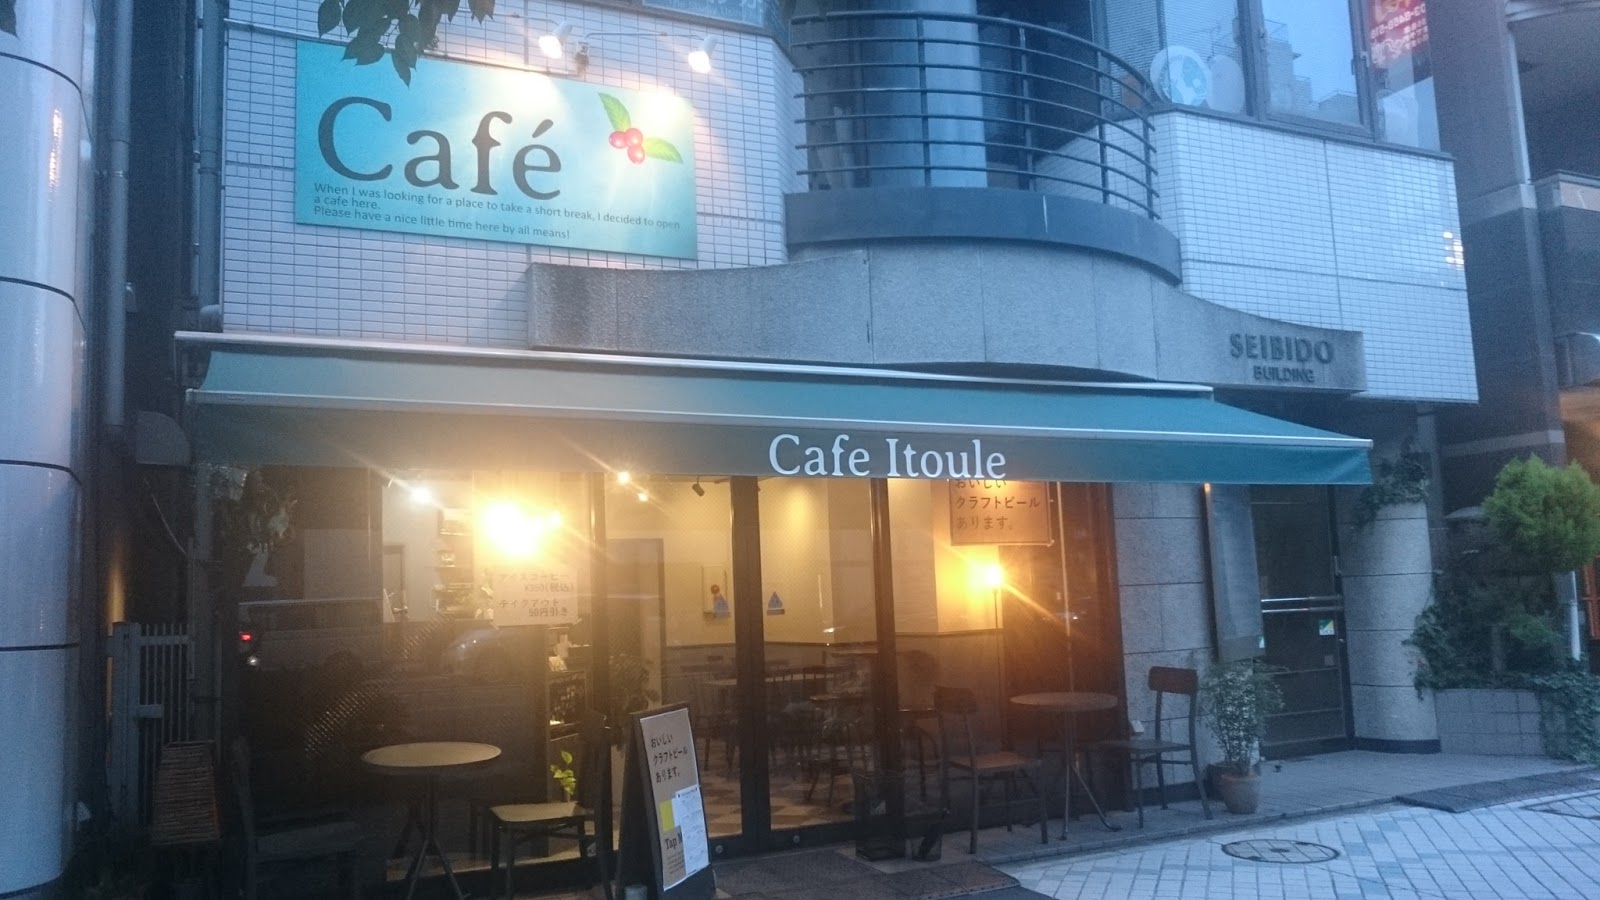 Cafe Itouleにて